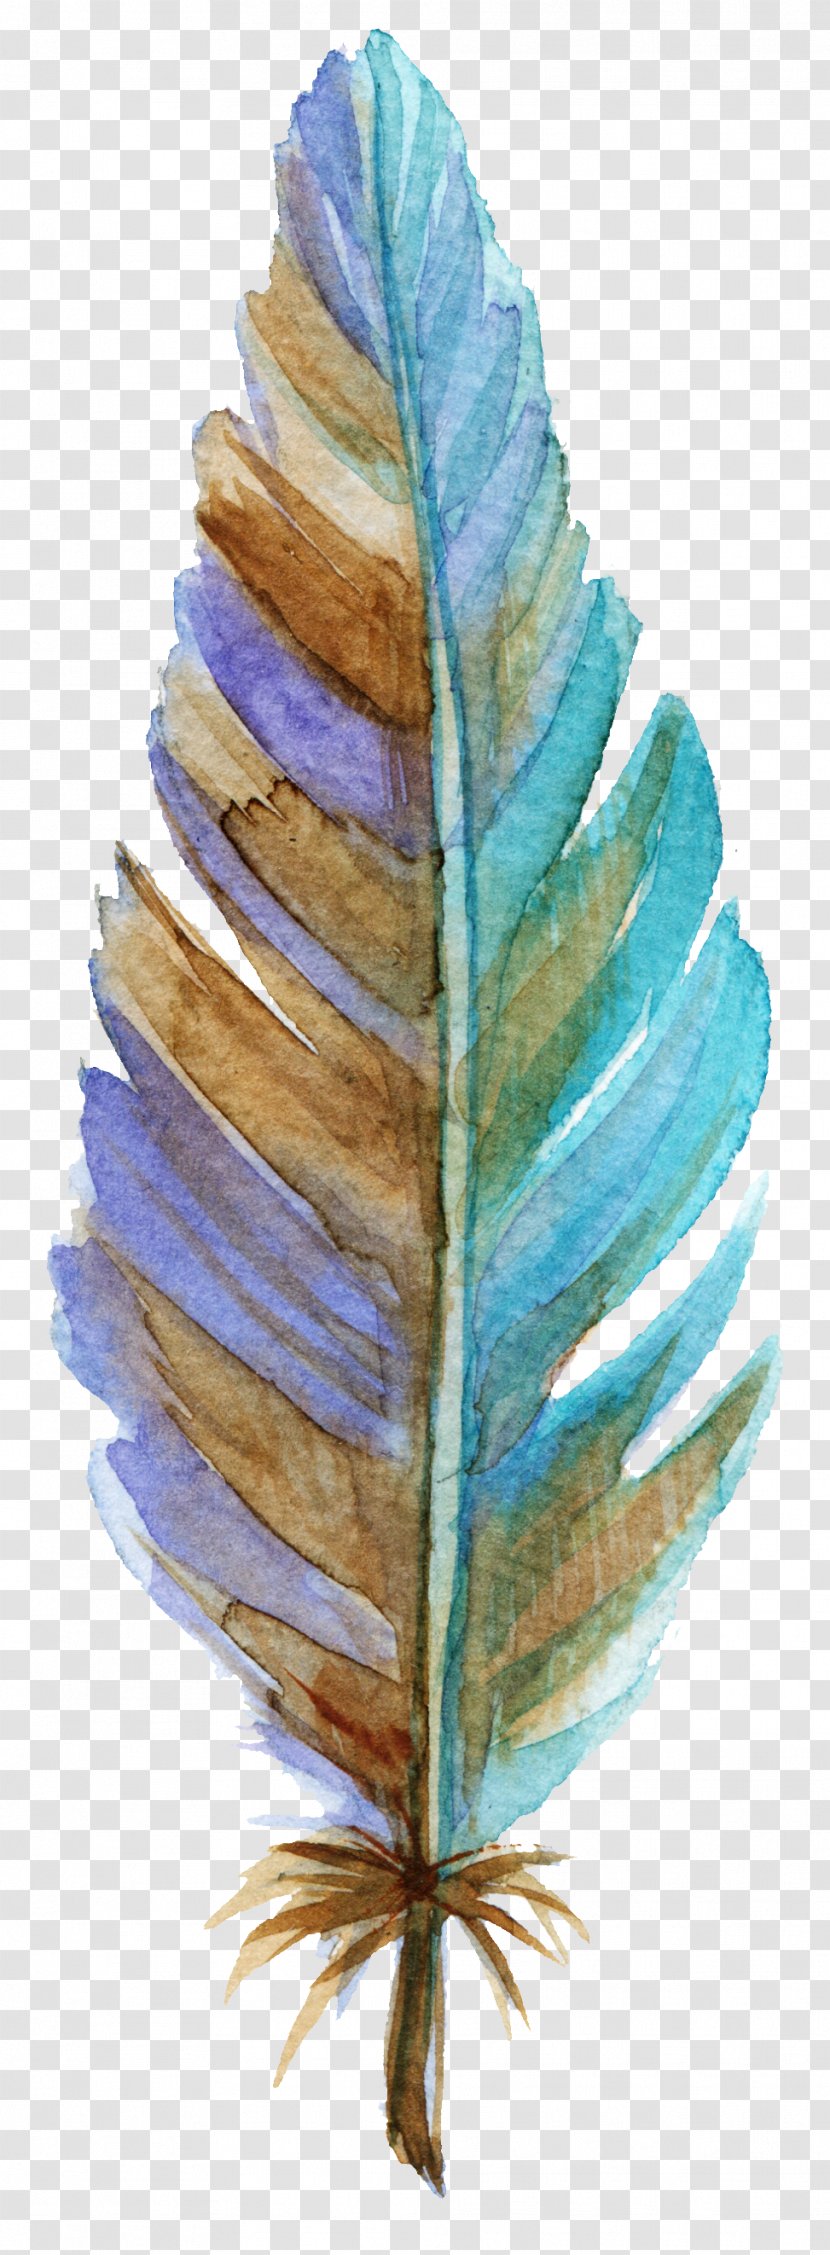 Leaf Feather Texture Mapping - Green - Blue Leaves Transparent PNG